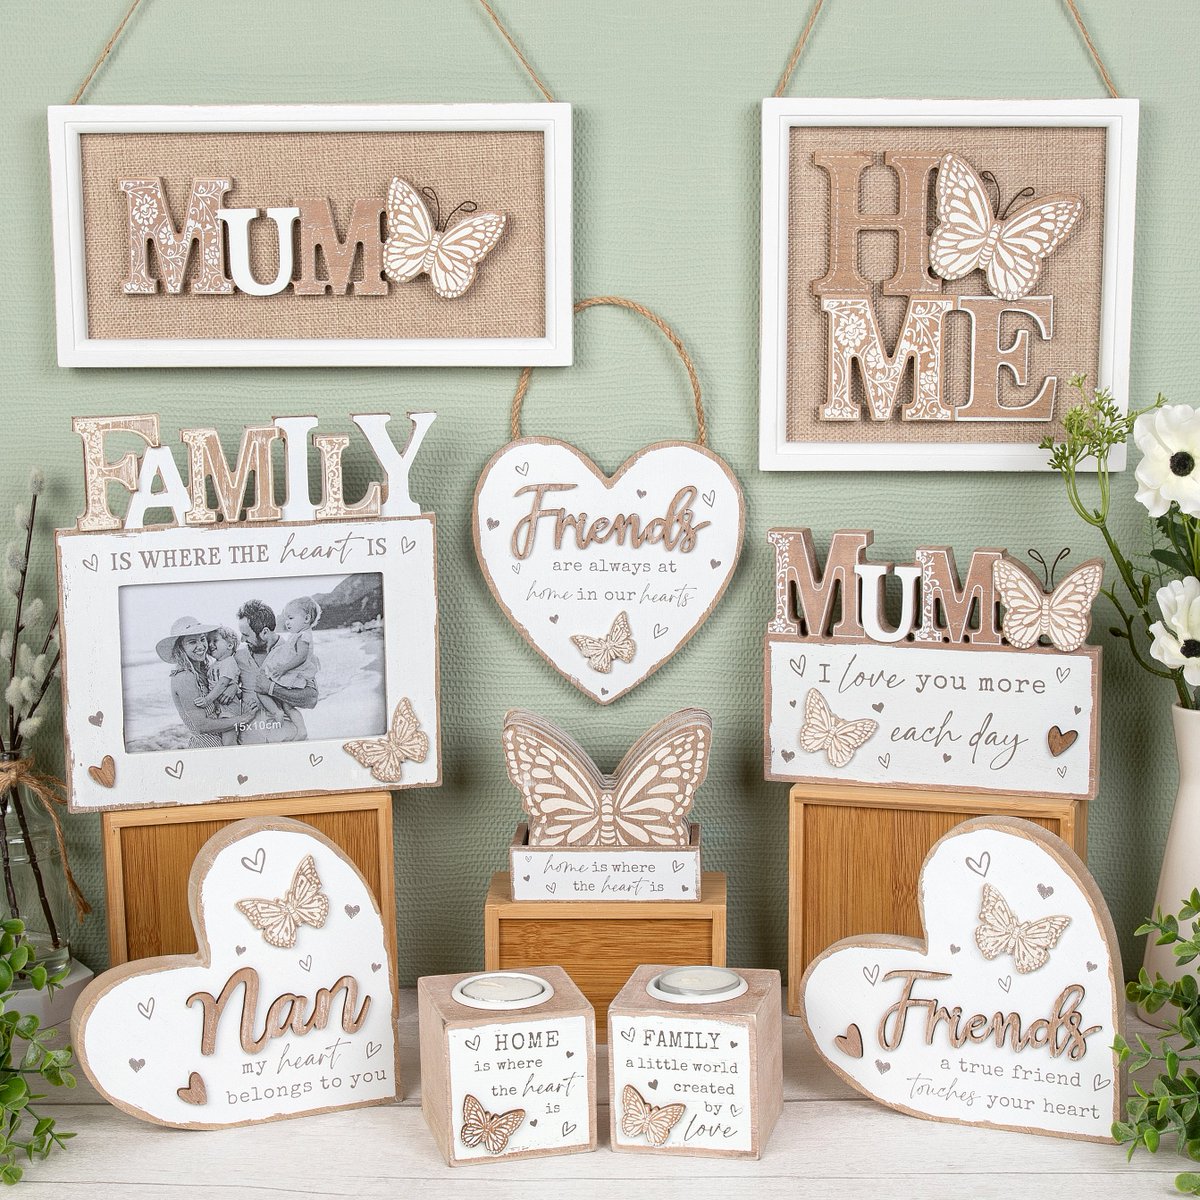 Whether you're adding to your home décor or searching for the perfect gift. Our Papillion collection of plaques, frames, tealights and coasters, add a touch of elegance and charm with their wooden shabby chic look and sweet sentiments. shop.joedavies.co.uk/range/wr13985 @joedaviesgifts